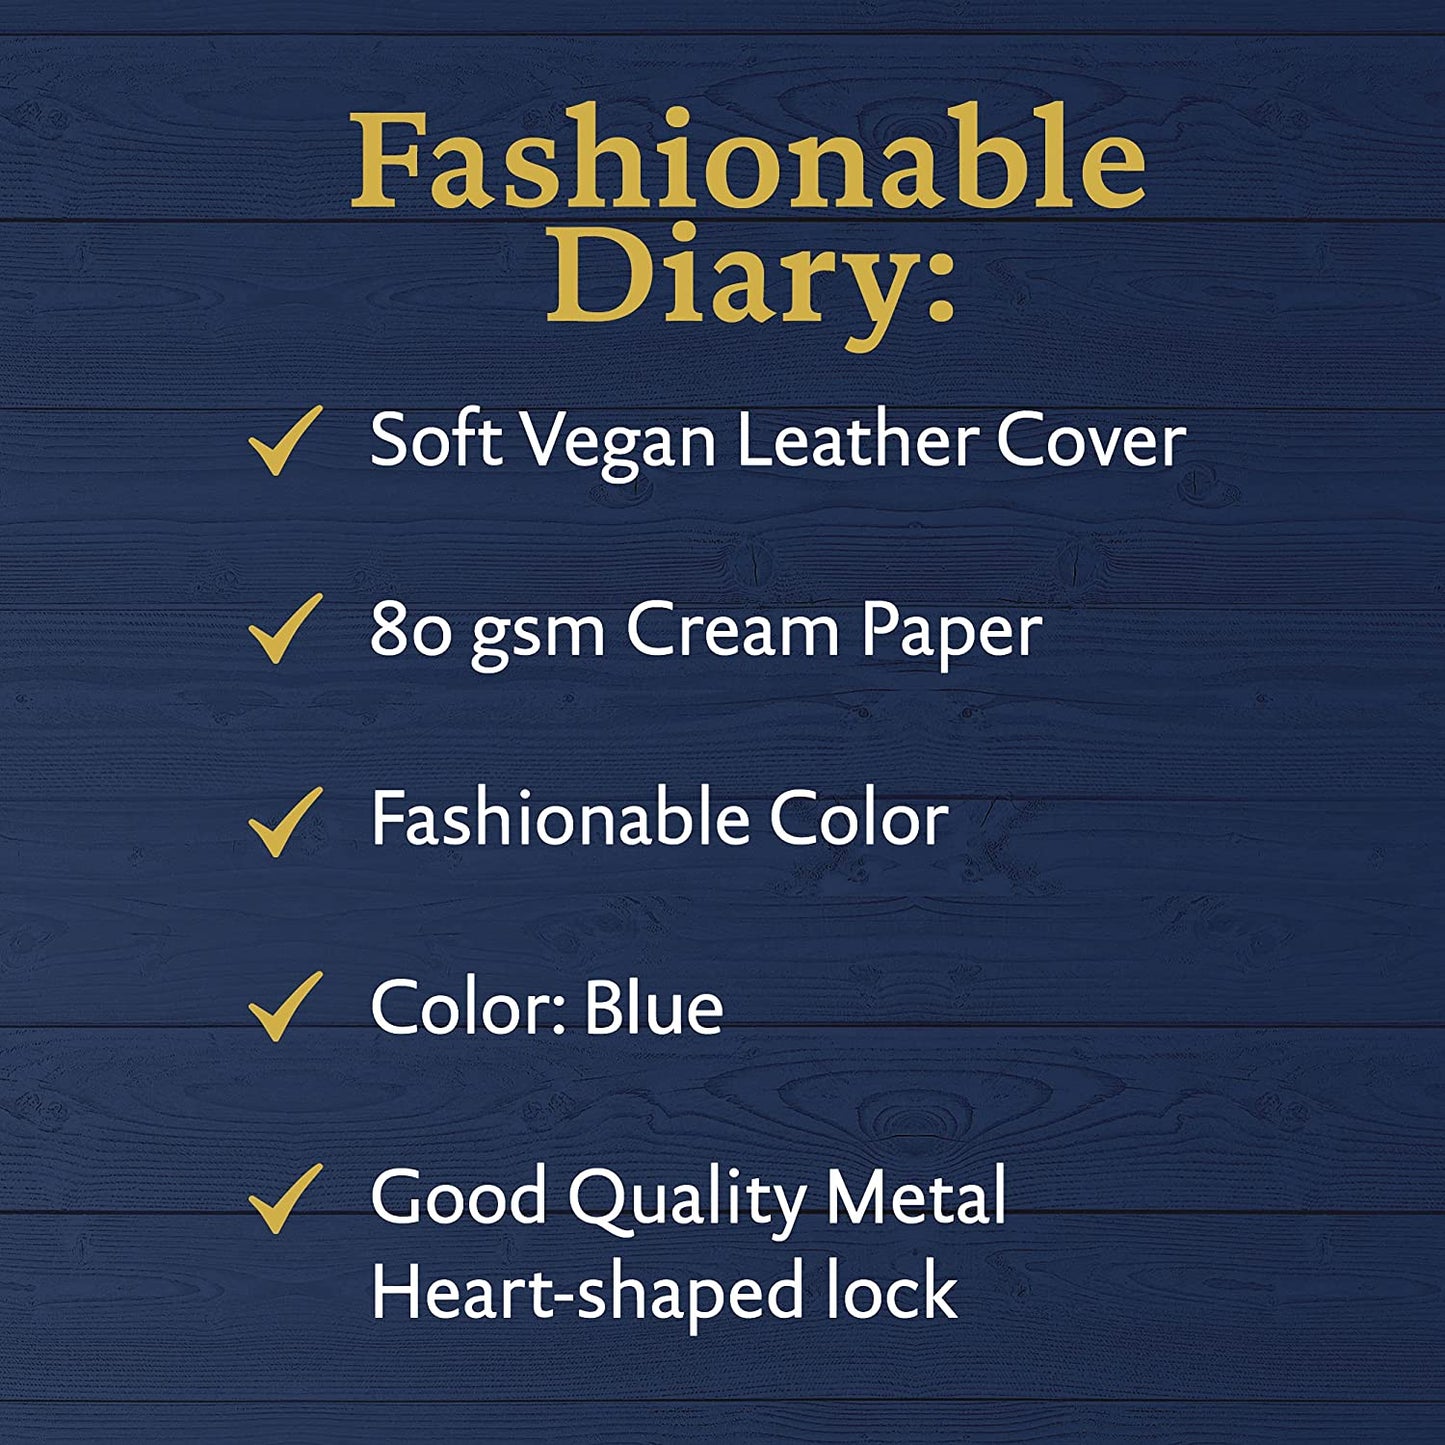 Heart Shaped Lock Journal, Lock Diary for Girls with Key, Vegan Leather Cover, Cute Locking Secret Notebook for Teens, 5.3x7.3",320p Victoria's Journals Secret Diary, College-ruled(Dark Blue)